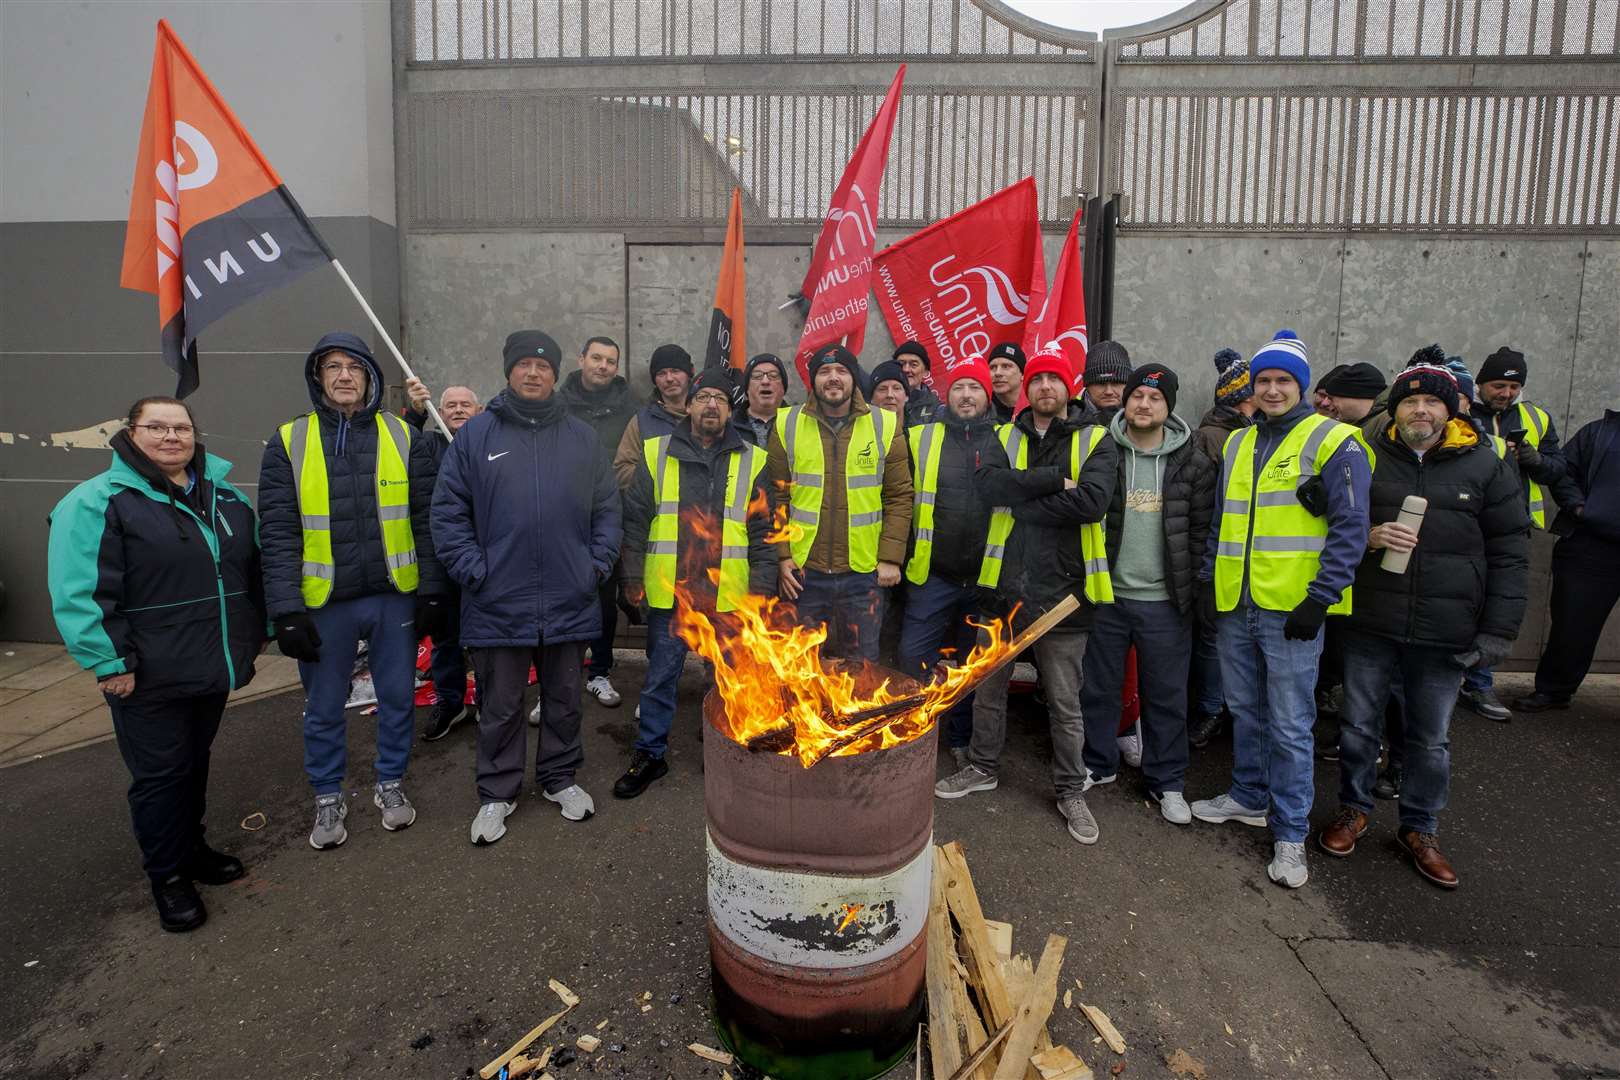 Unions have said strike action will continue until their pay concerns are met (Liam McBurney/PA)